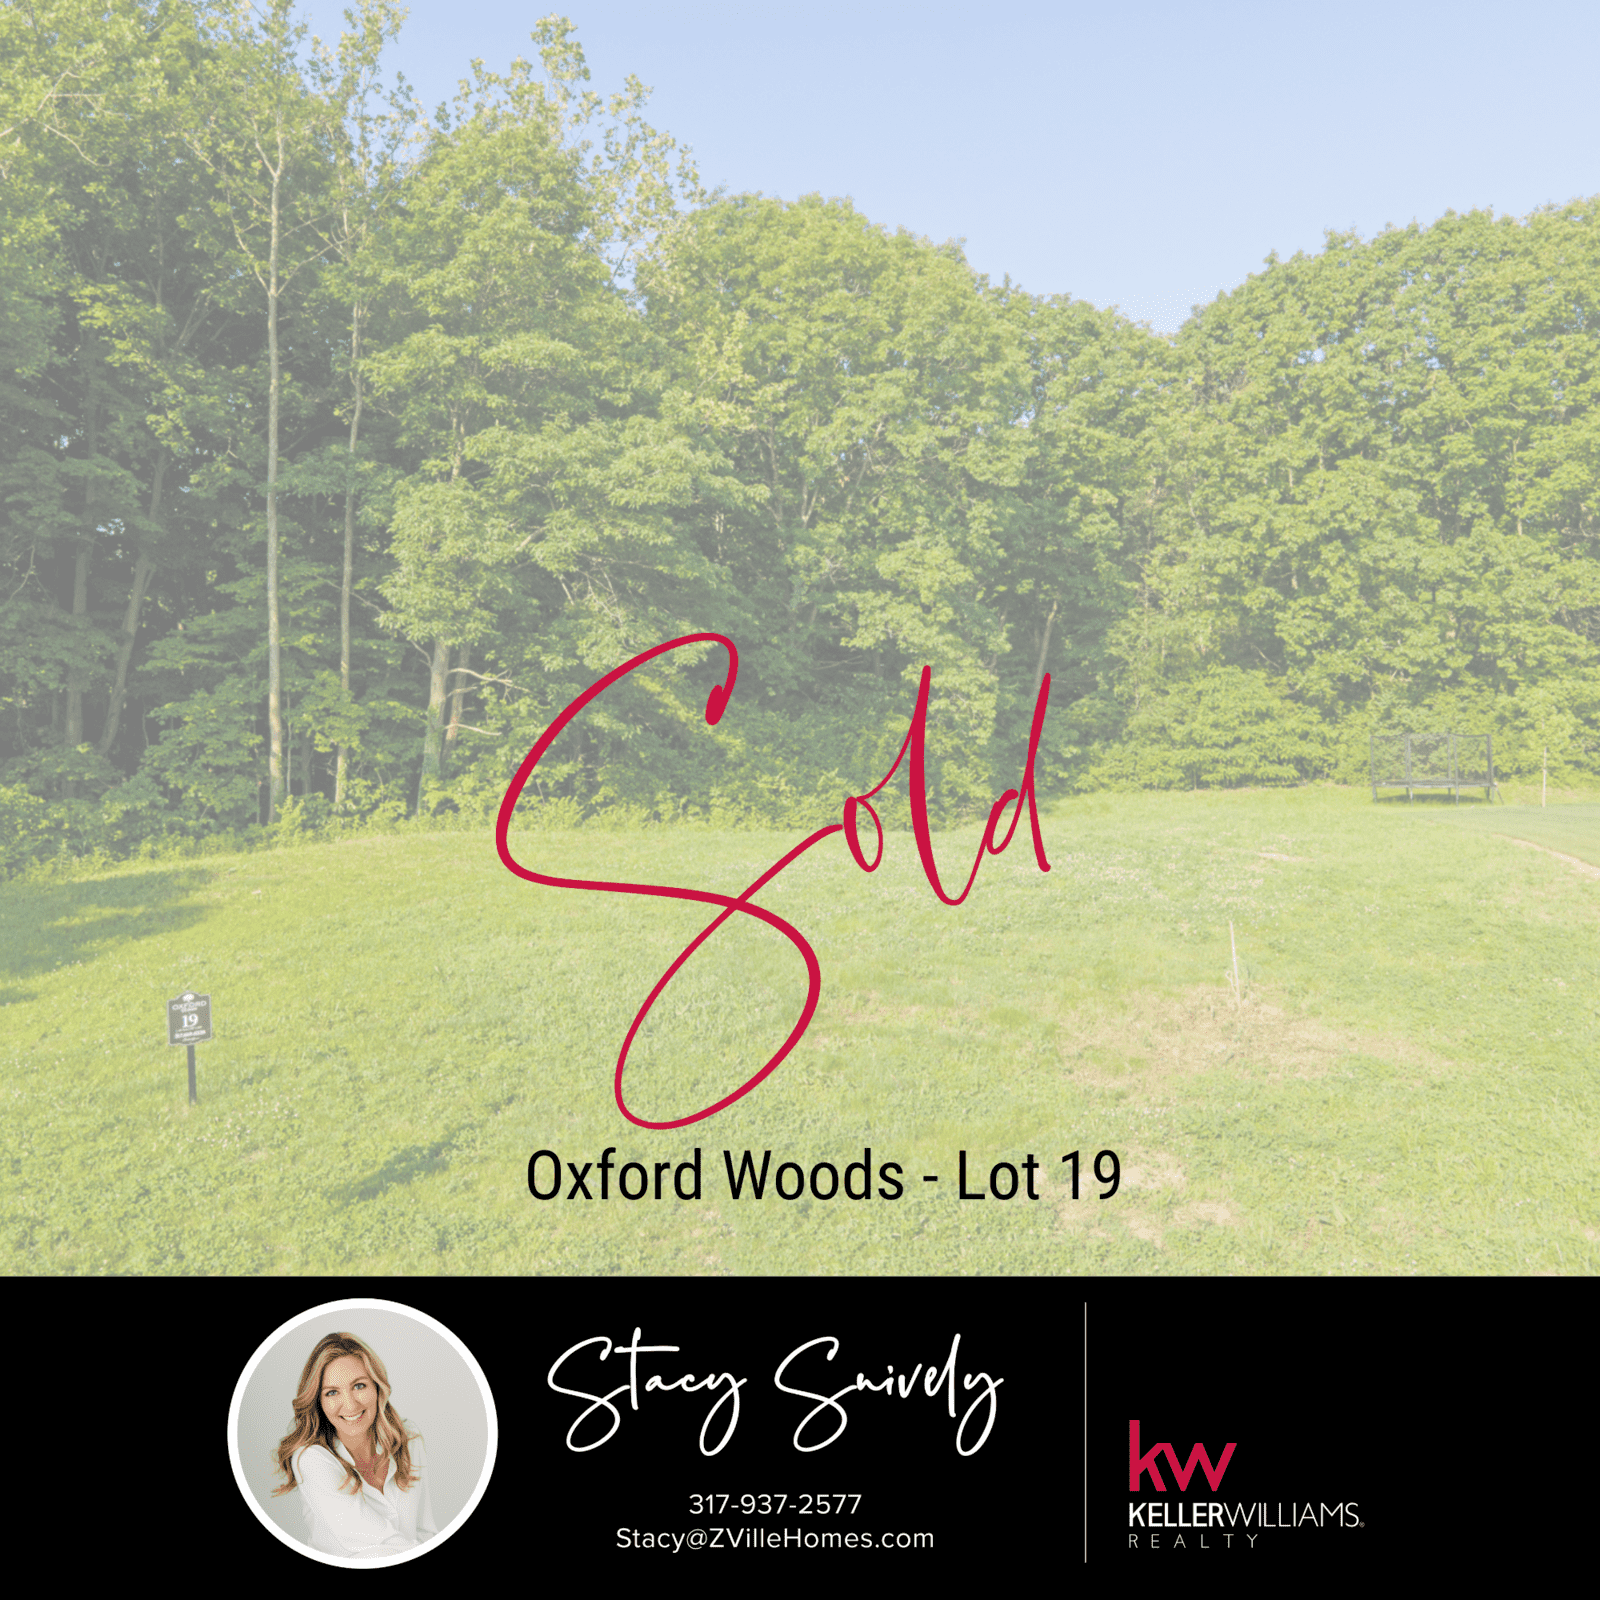 Oxford Woods - Lot 19 Just Listed